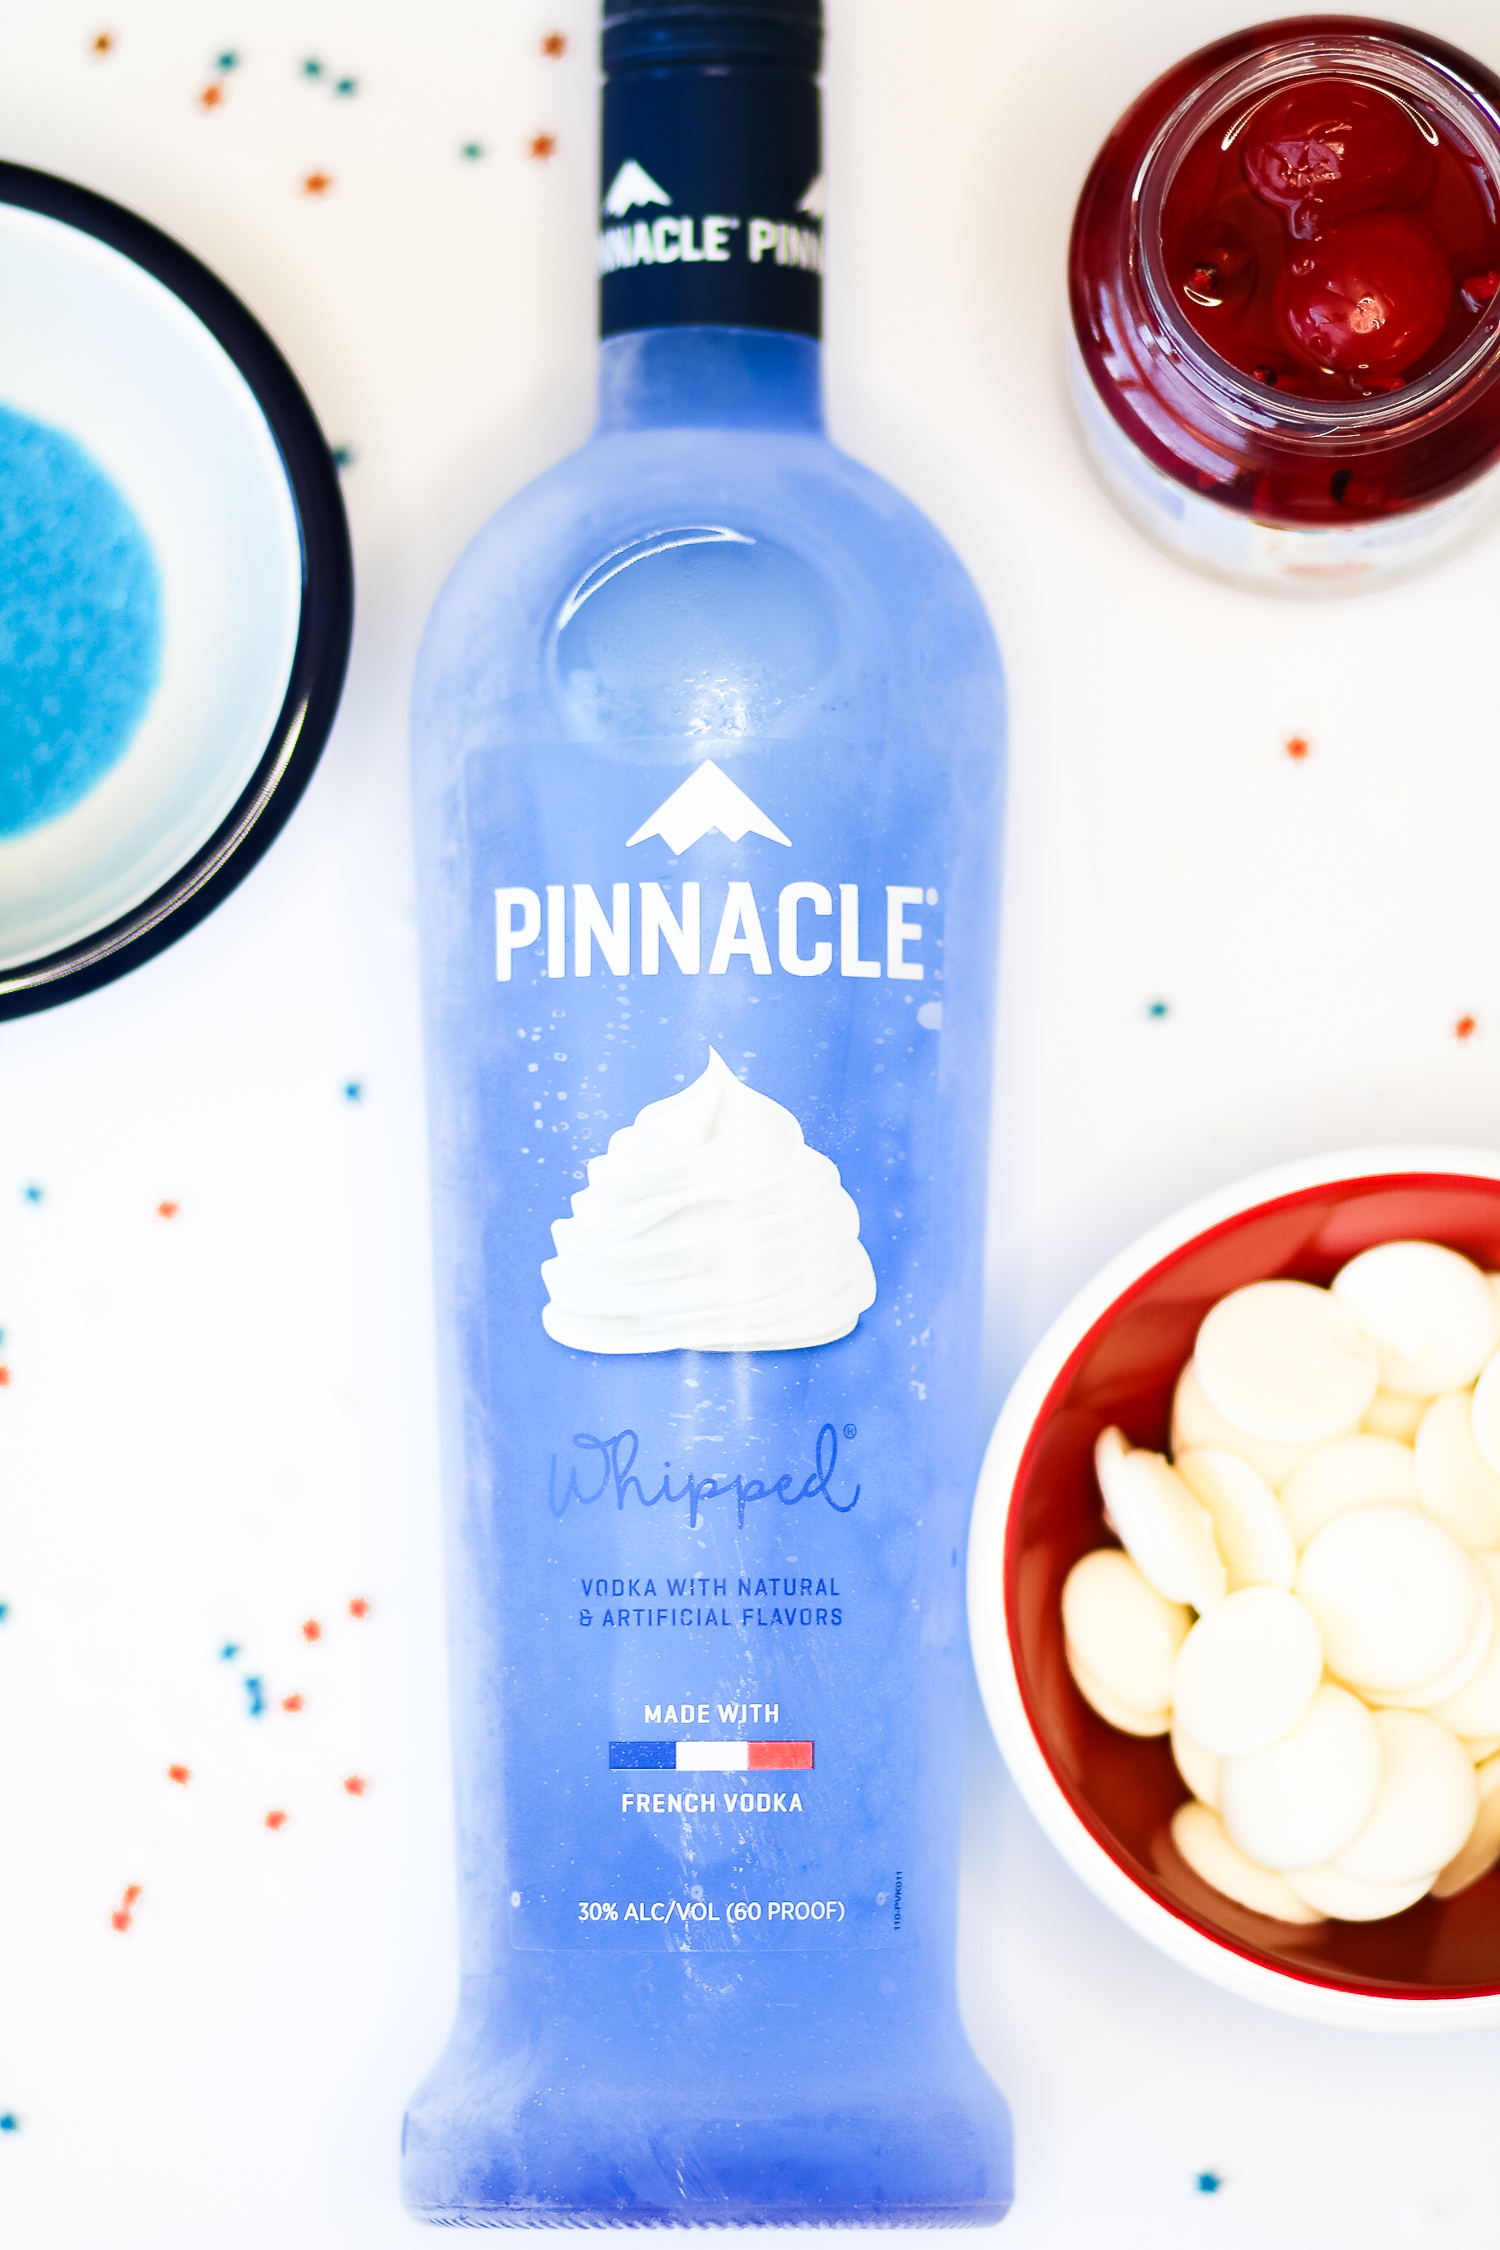 Bottle of Pinnacle whipped cream vodka on Diary of a Debutante